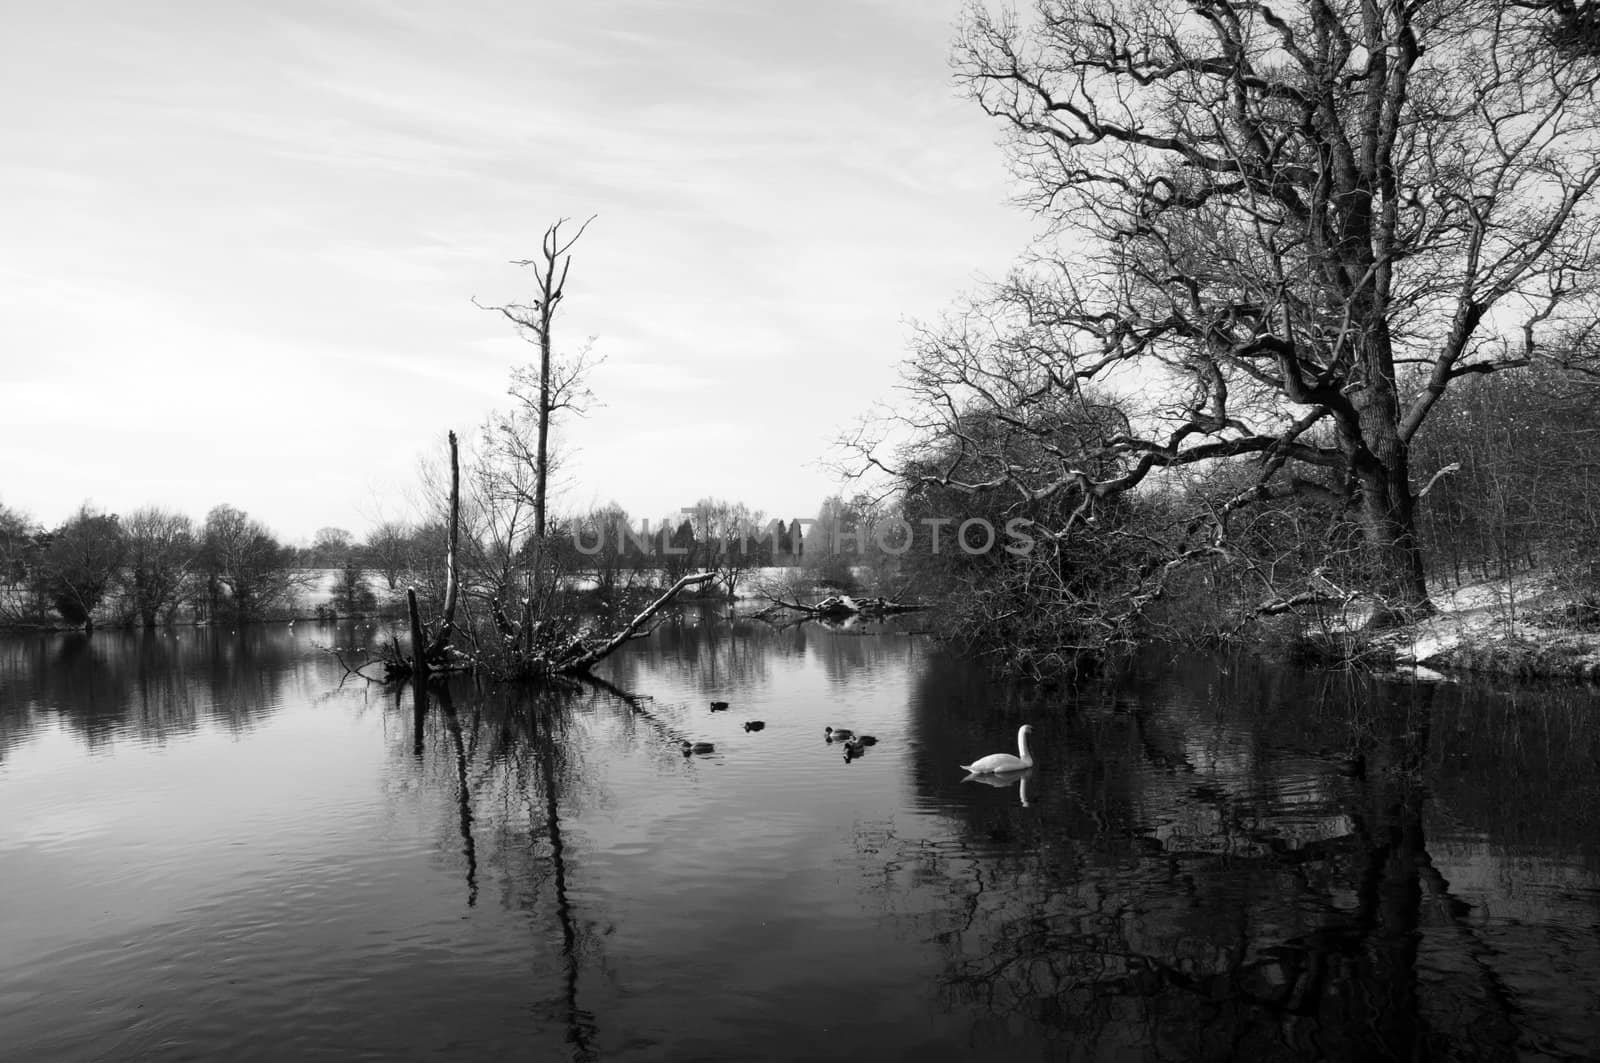 A black and white image of a lake in winter